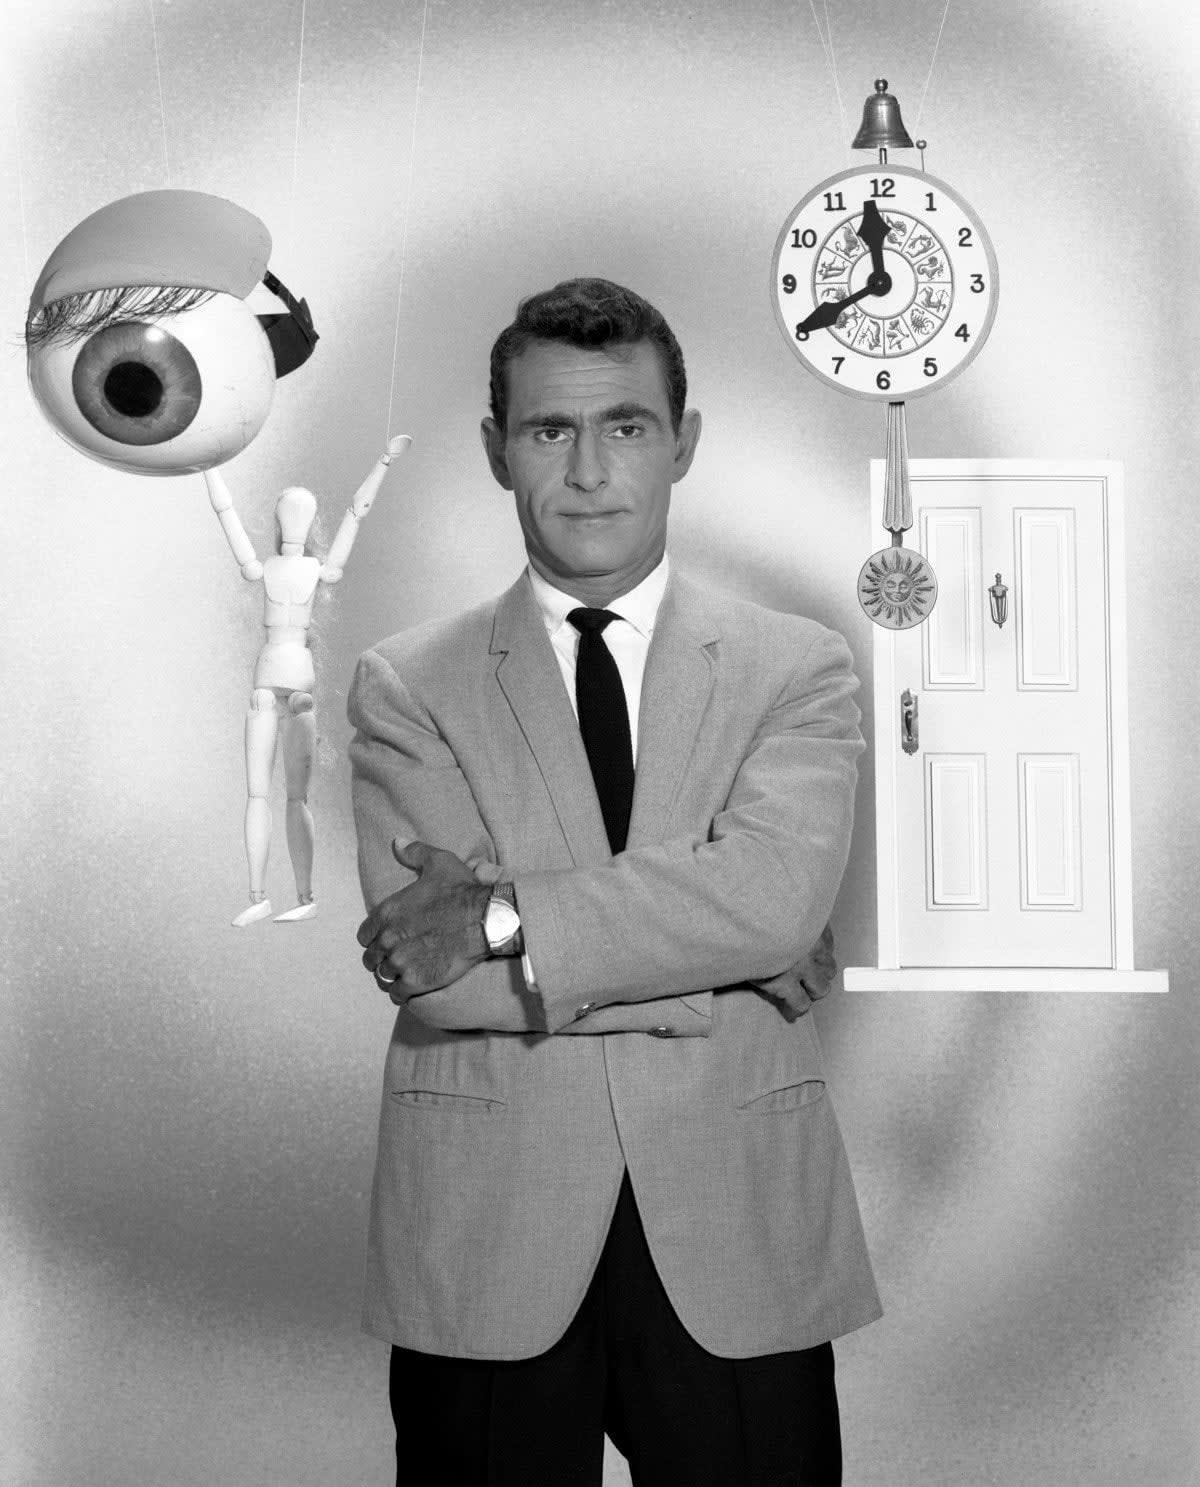 Top 10 “Twilight Zone” Episodes; That Speaks To Us About Humanity